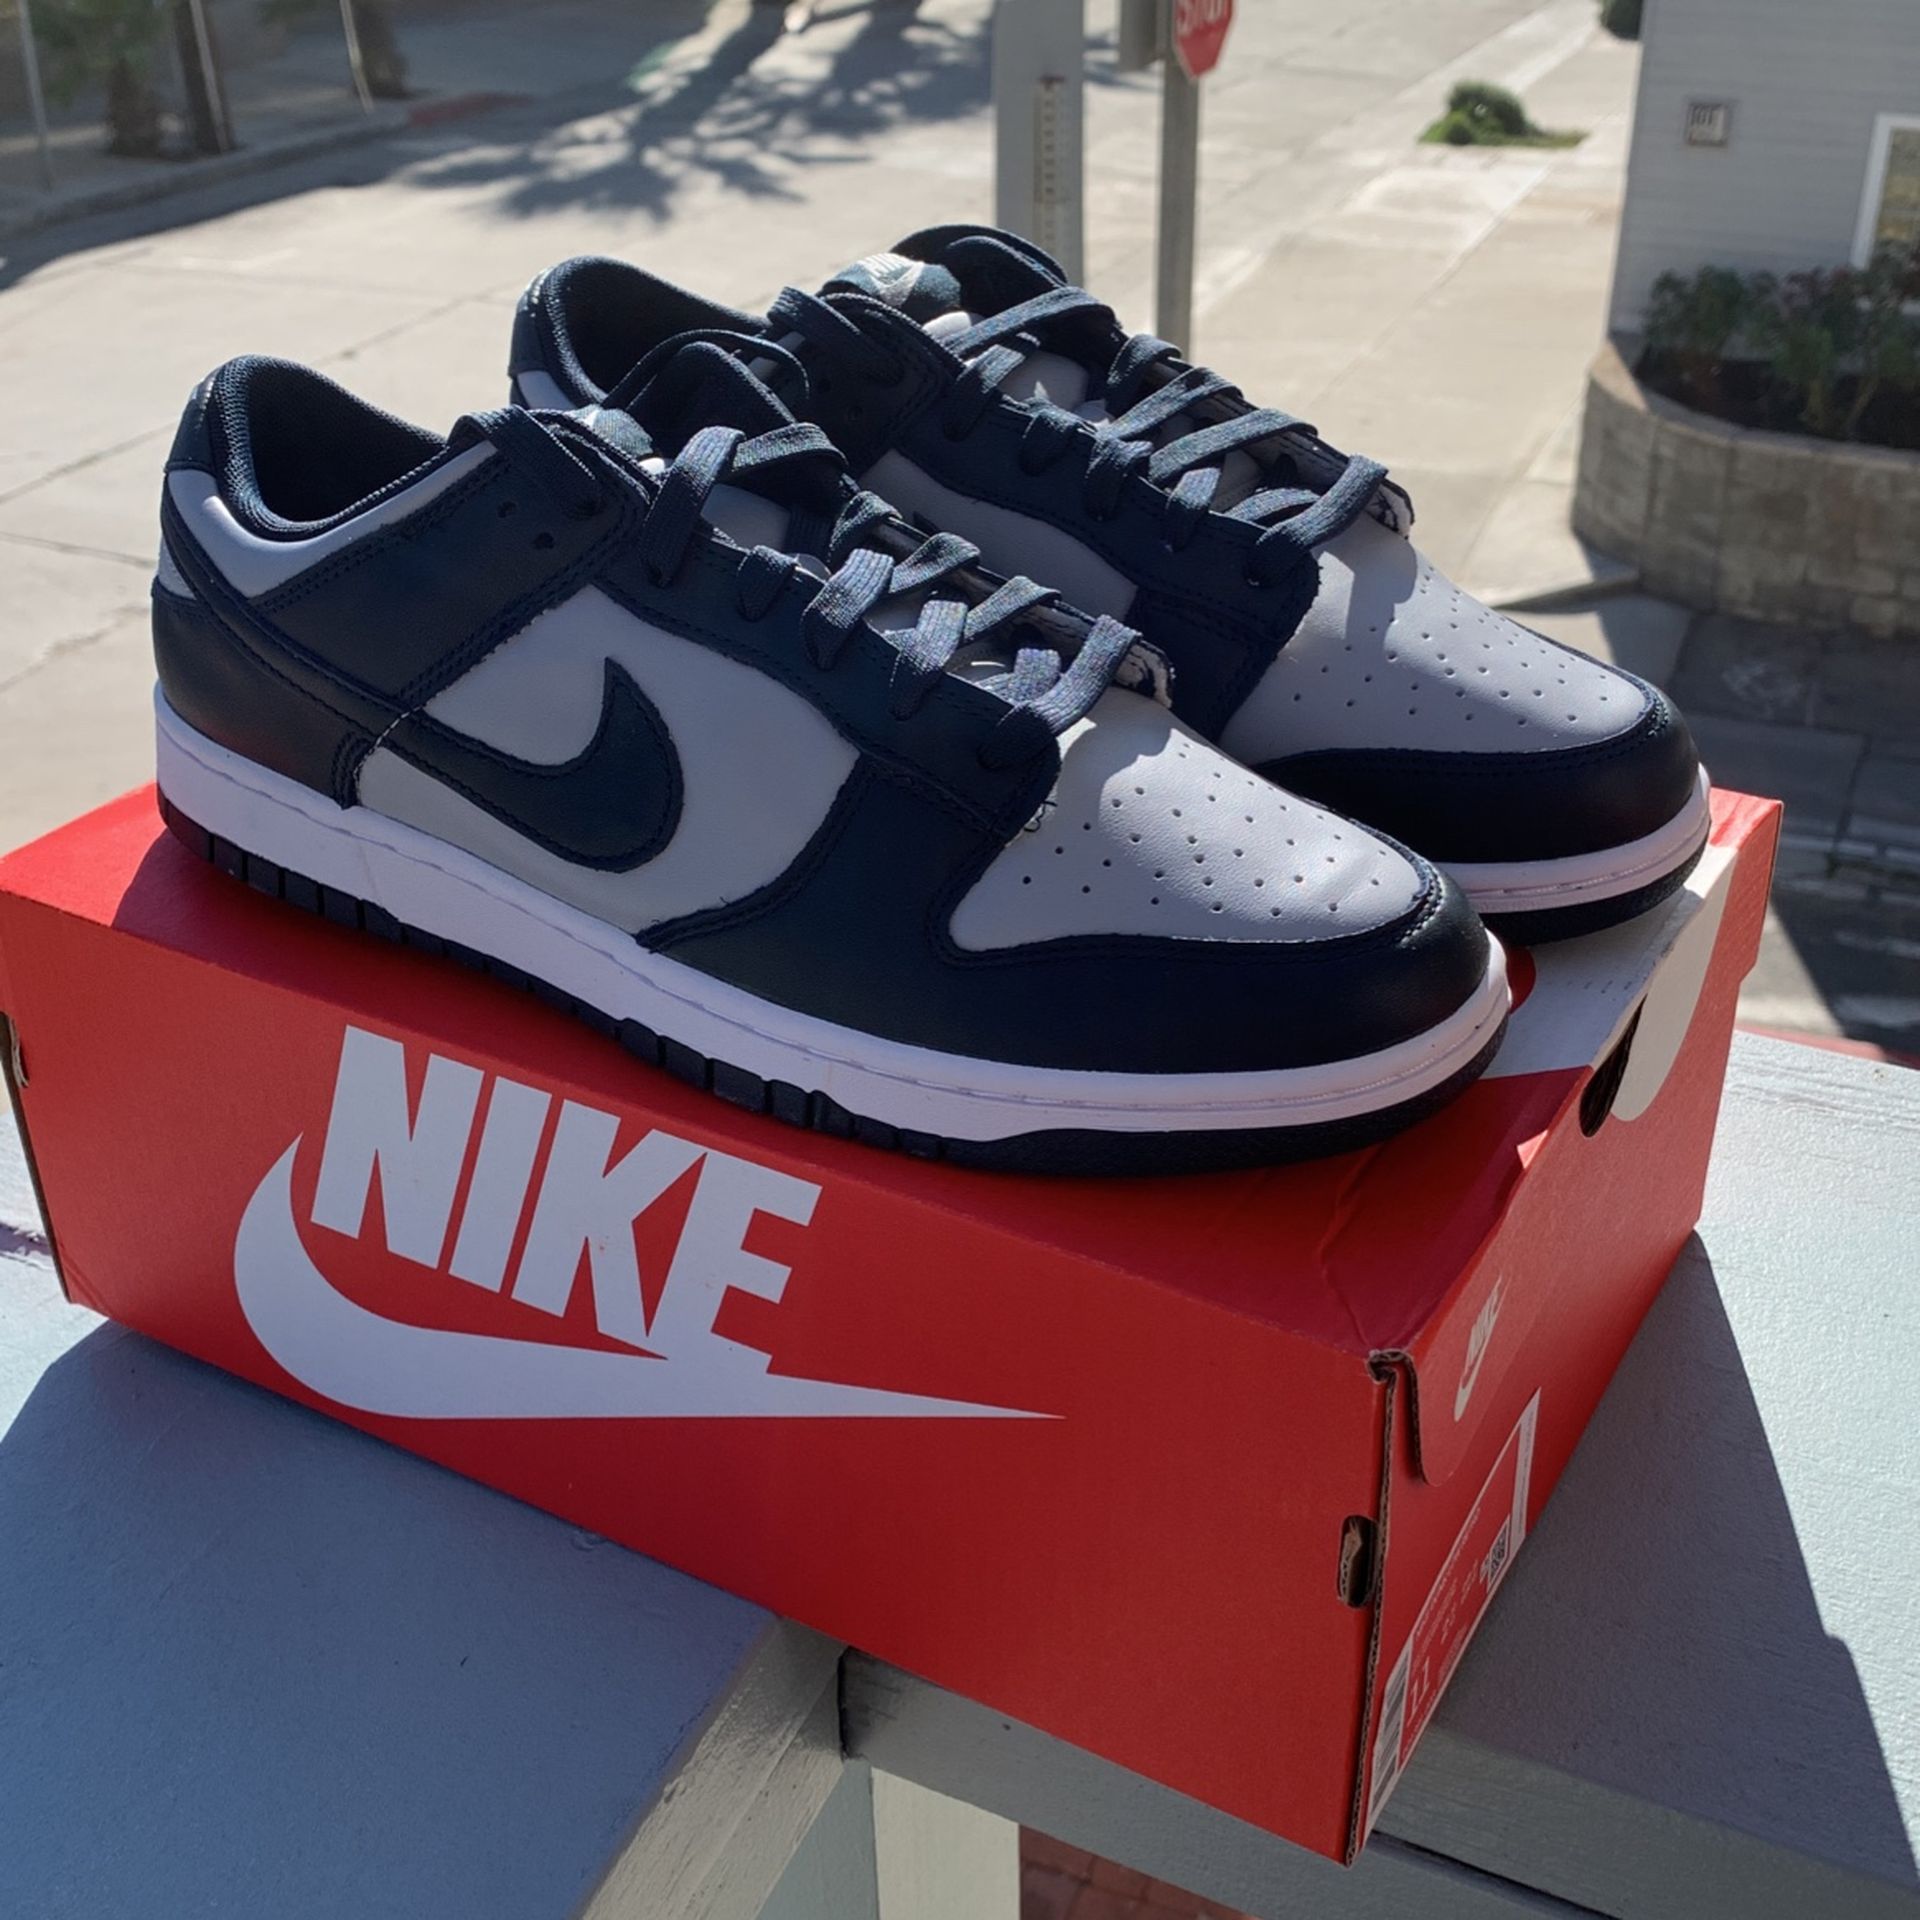 🔥BRAND NEW - IN HAND!!! Nike Dunk Low Georgetown Navy Grey Sz 11